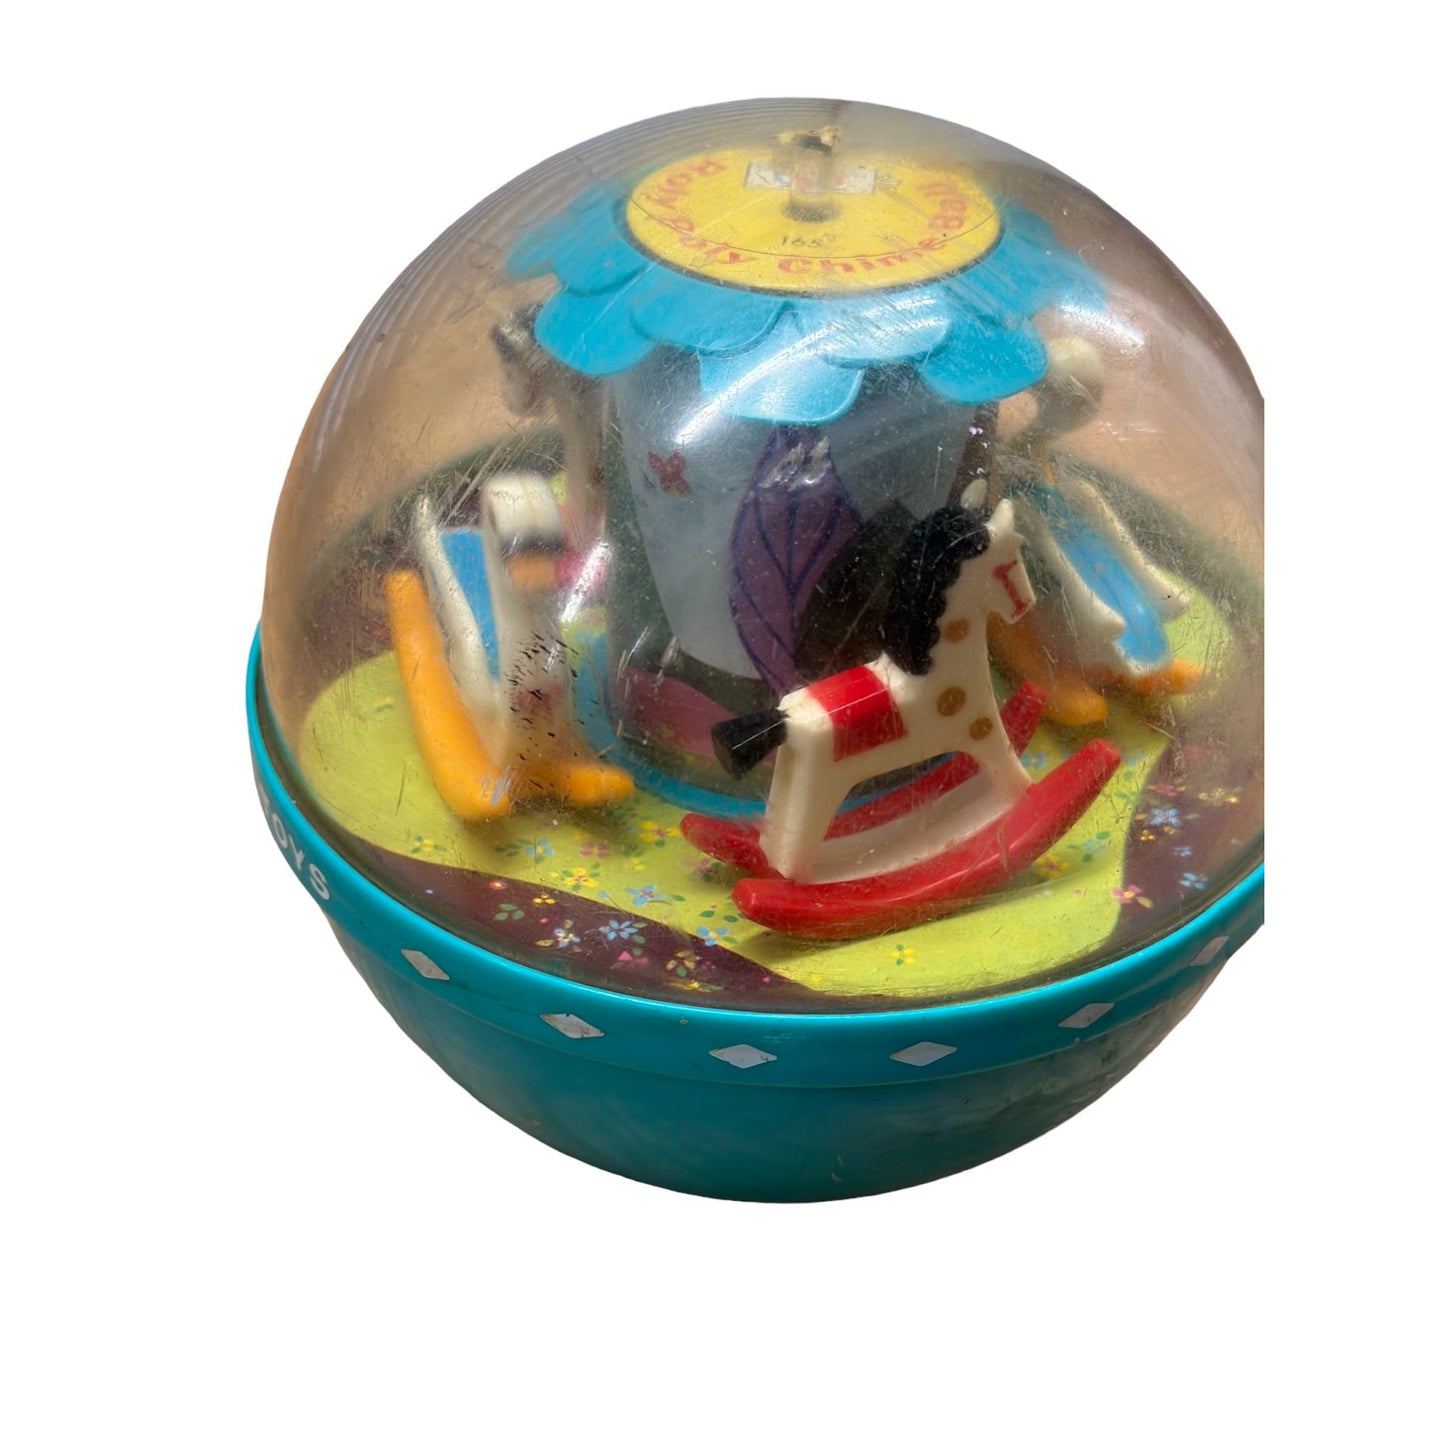 Vintage Fisher Price 1966 Roly Poly Chime Ball #165 Musical Baby Carousel Toy